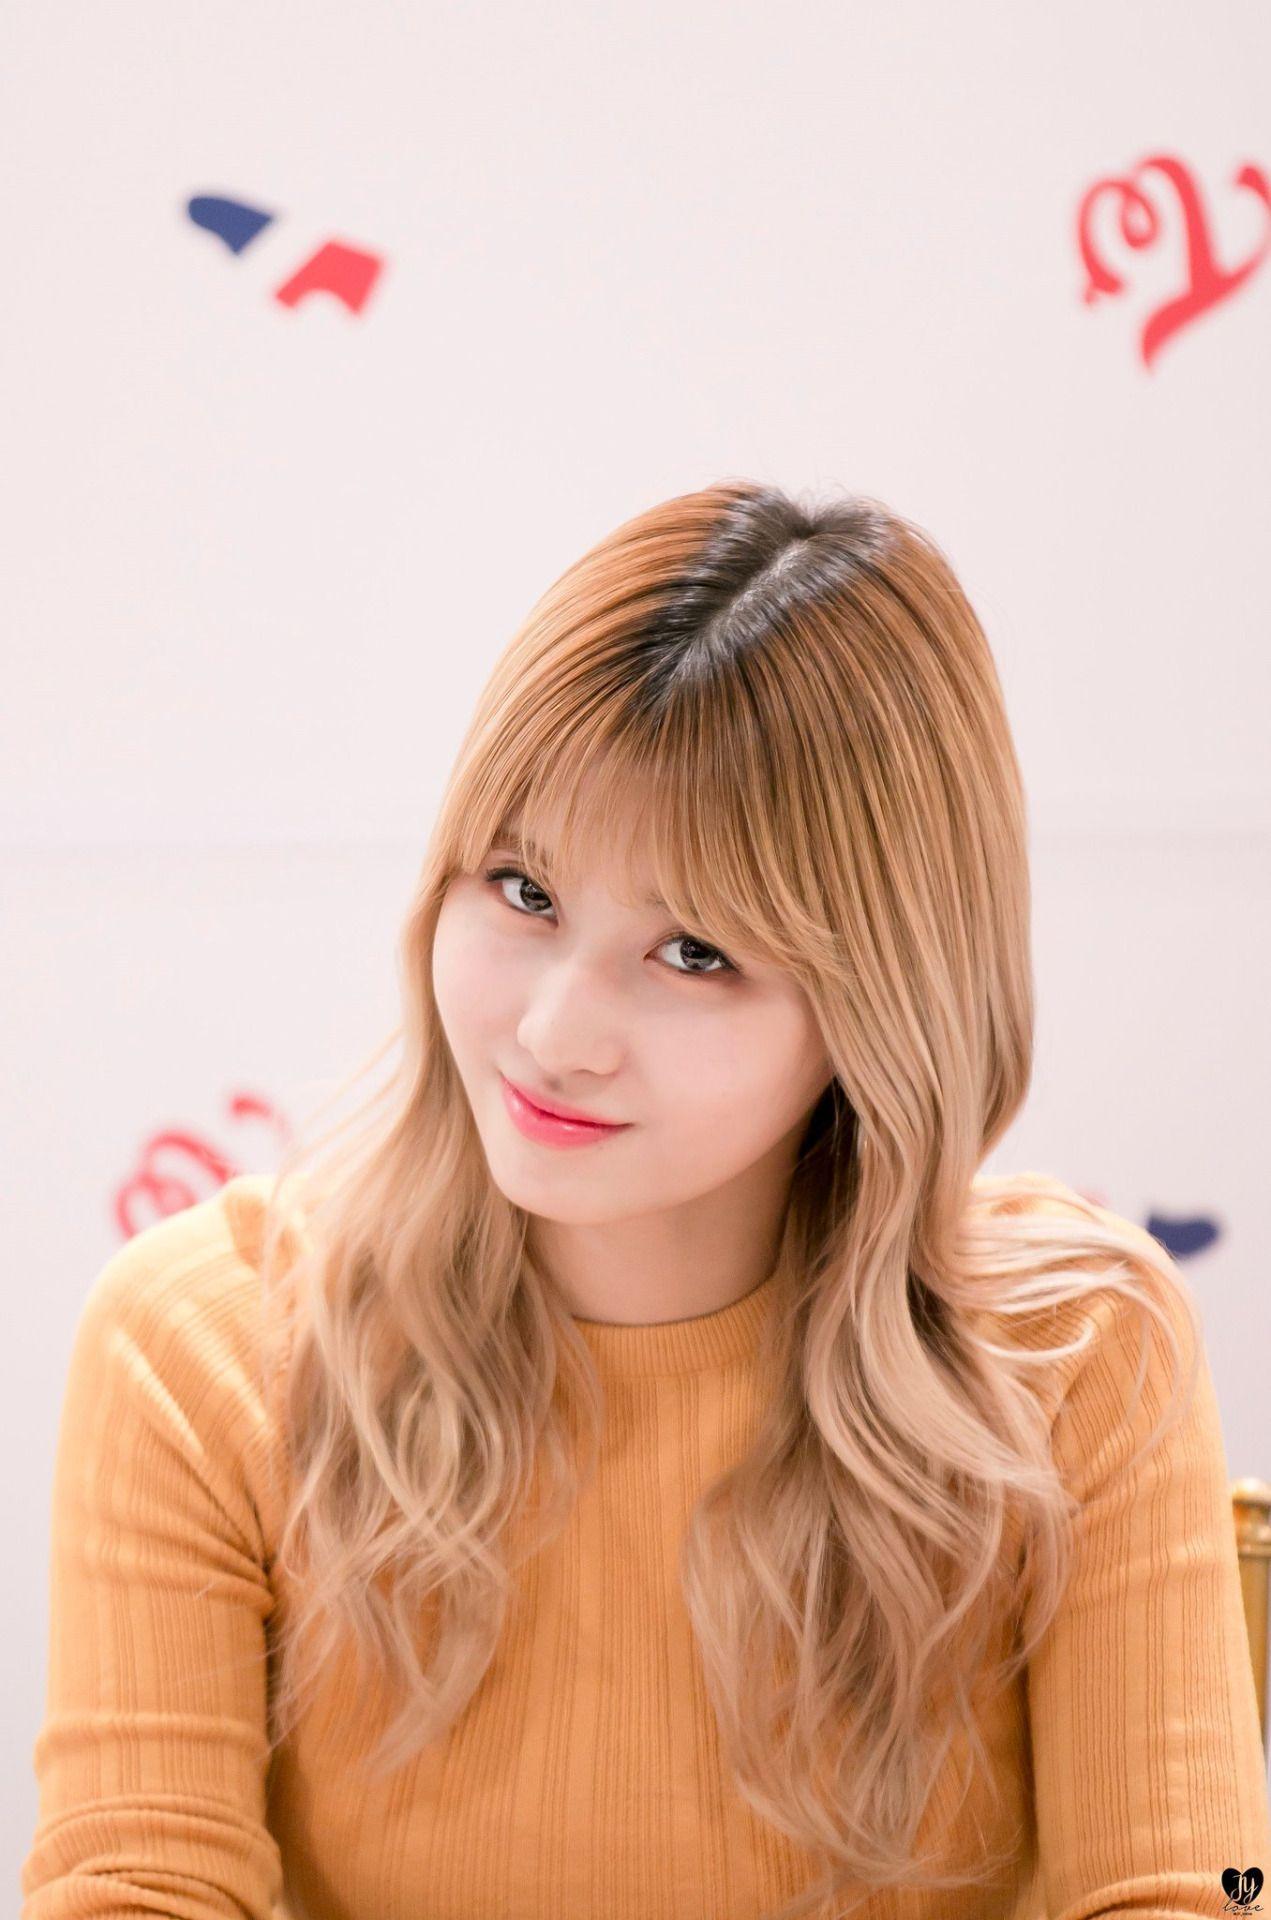 Momo Twice Wallpapers - Wallpaper Cave